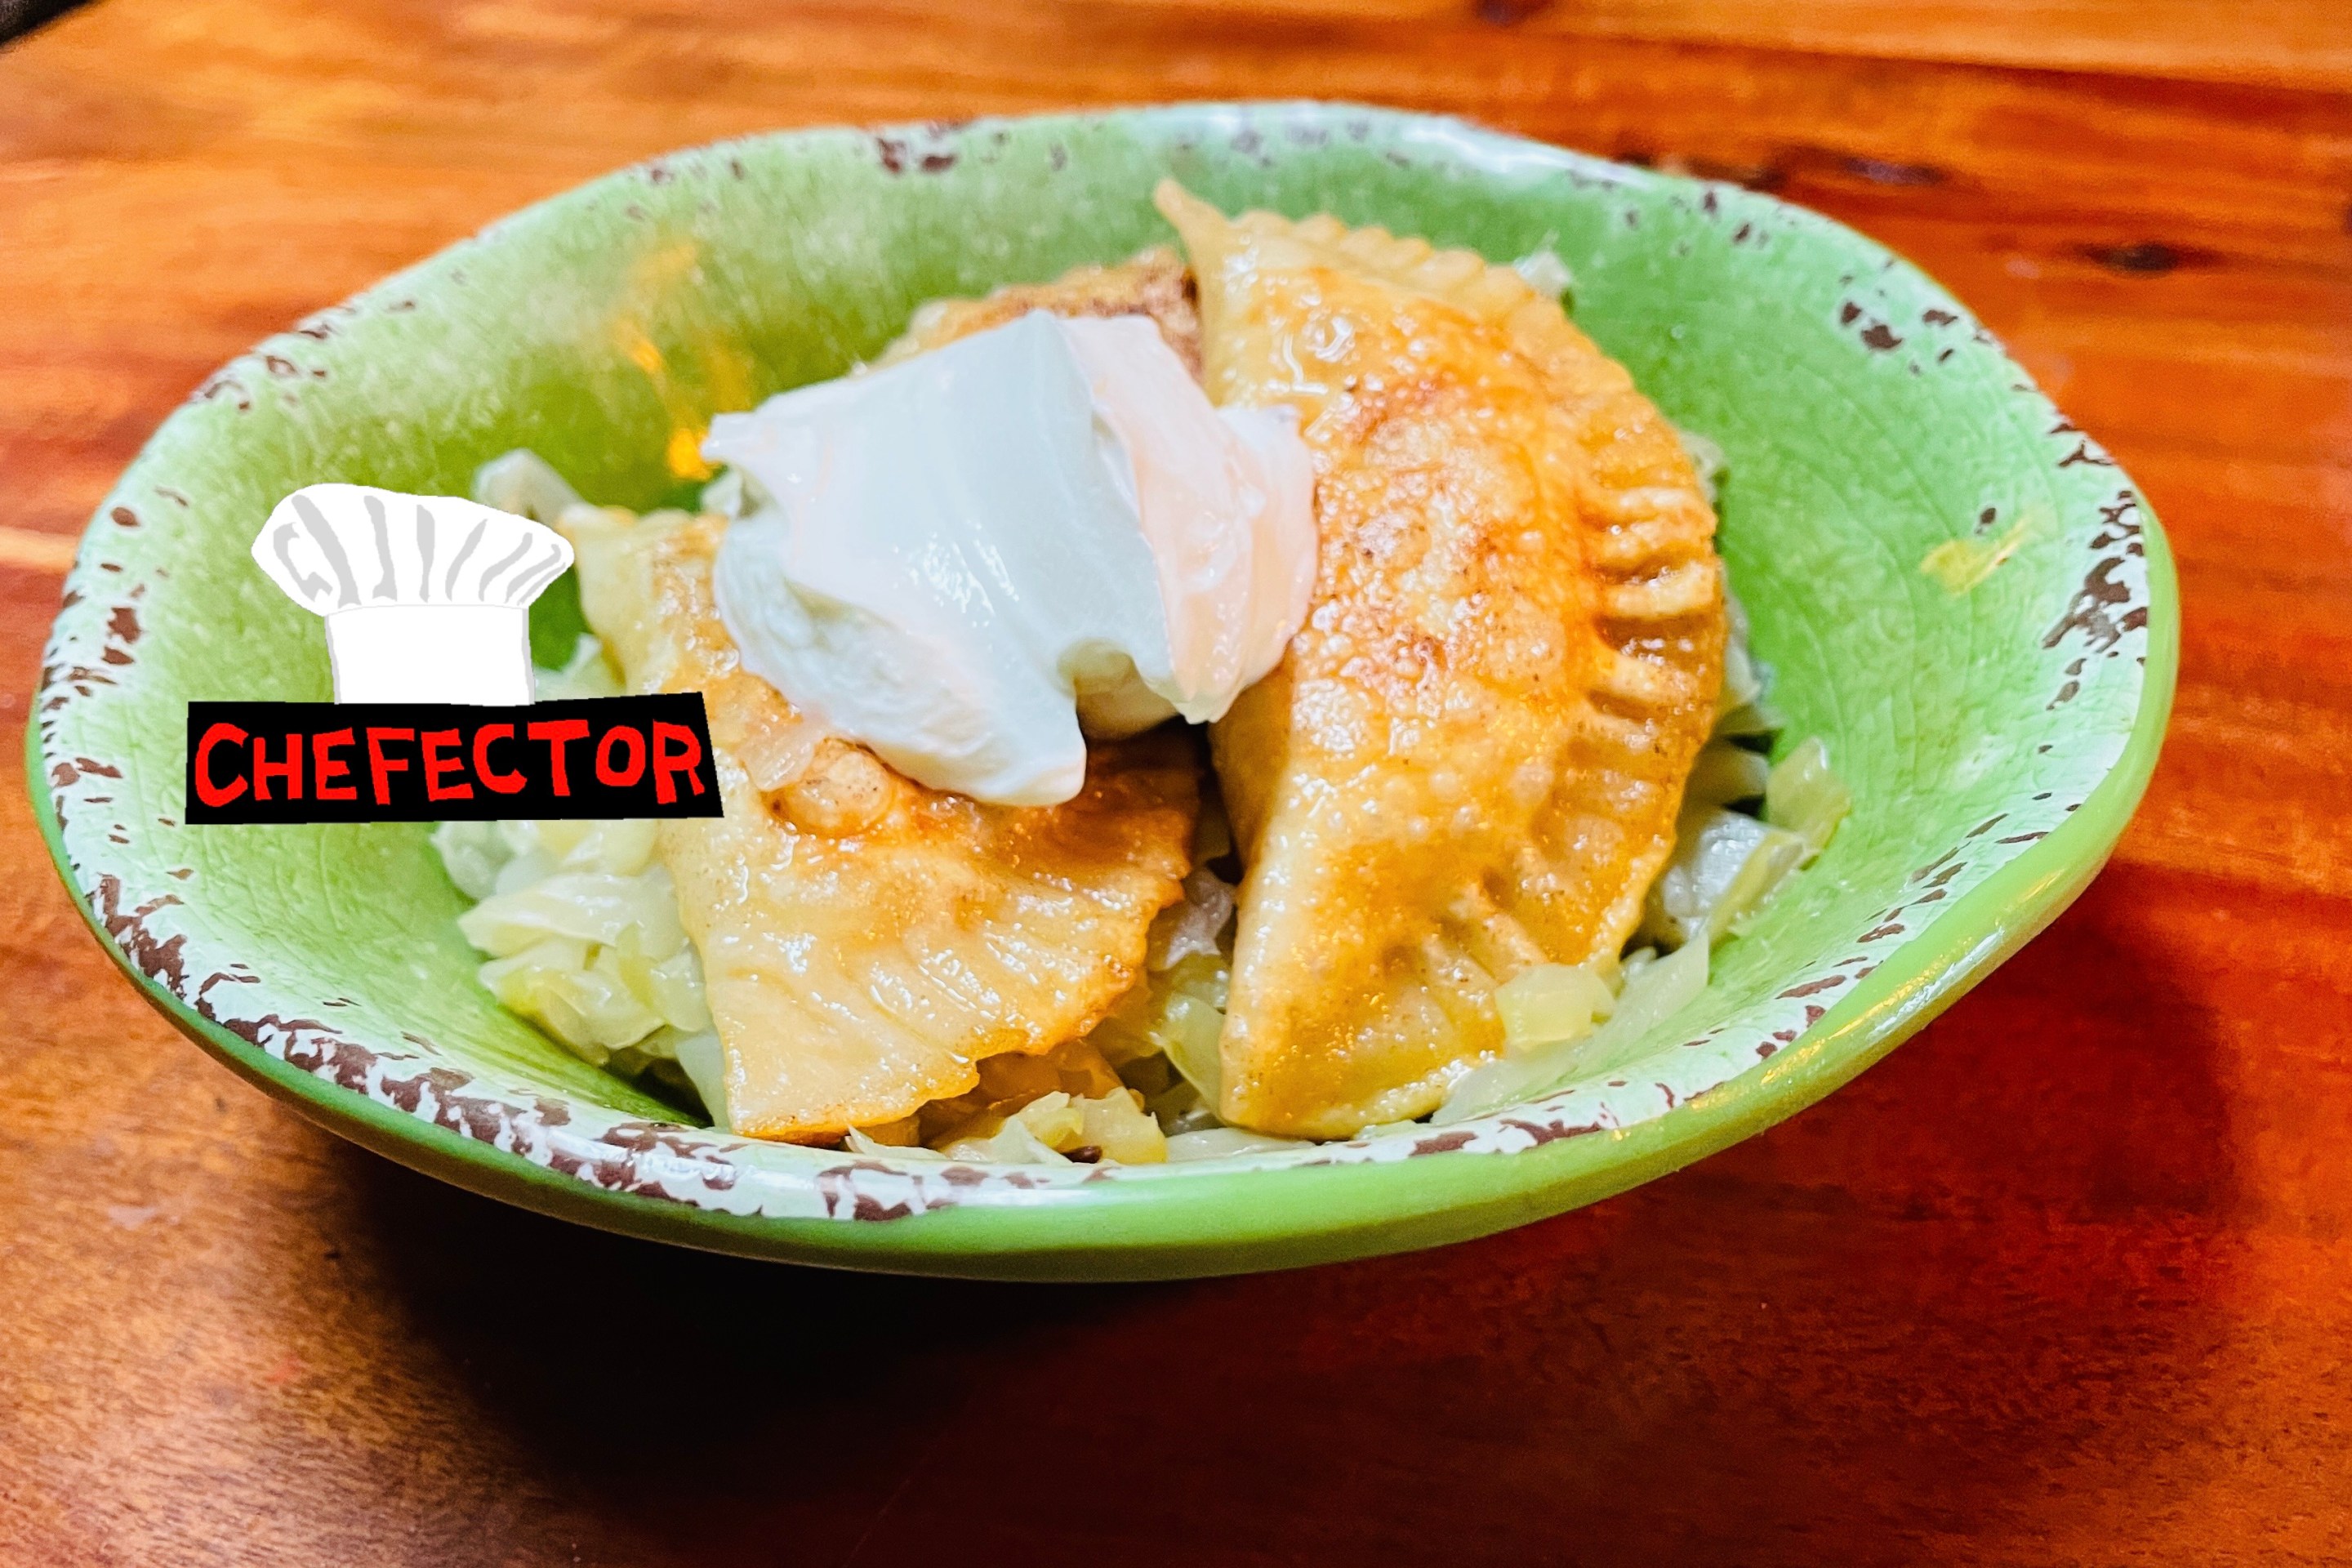 A bowl of pierogi with cabbage and sour cream